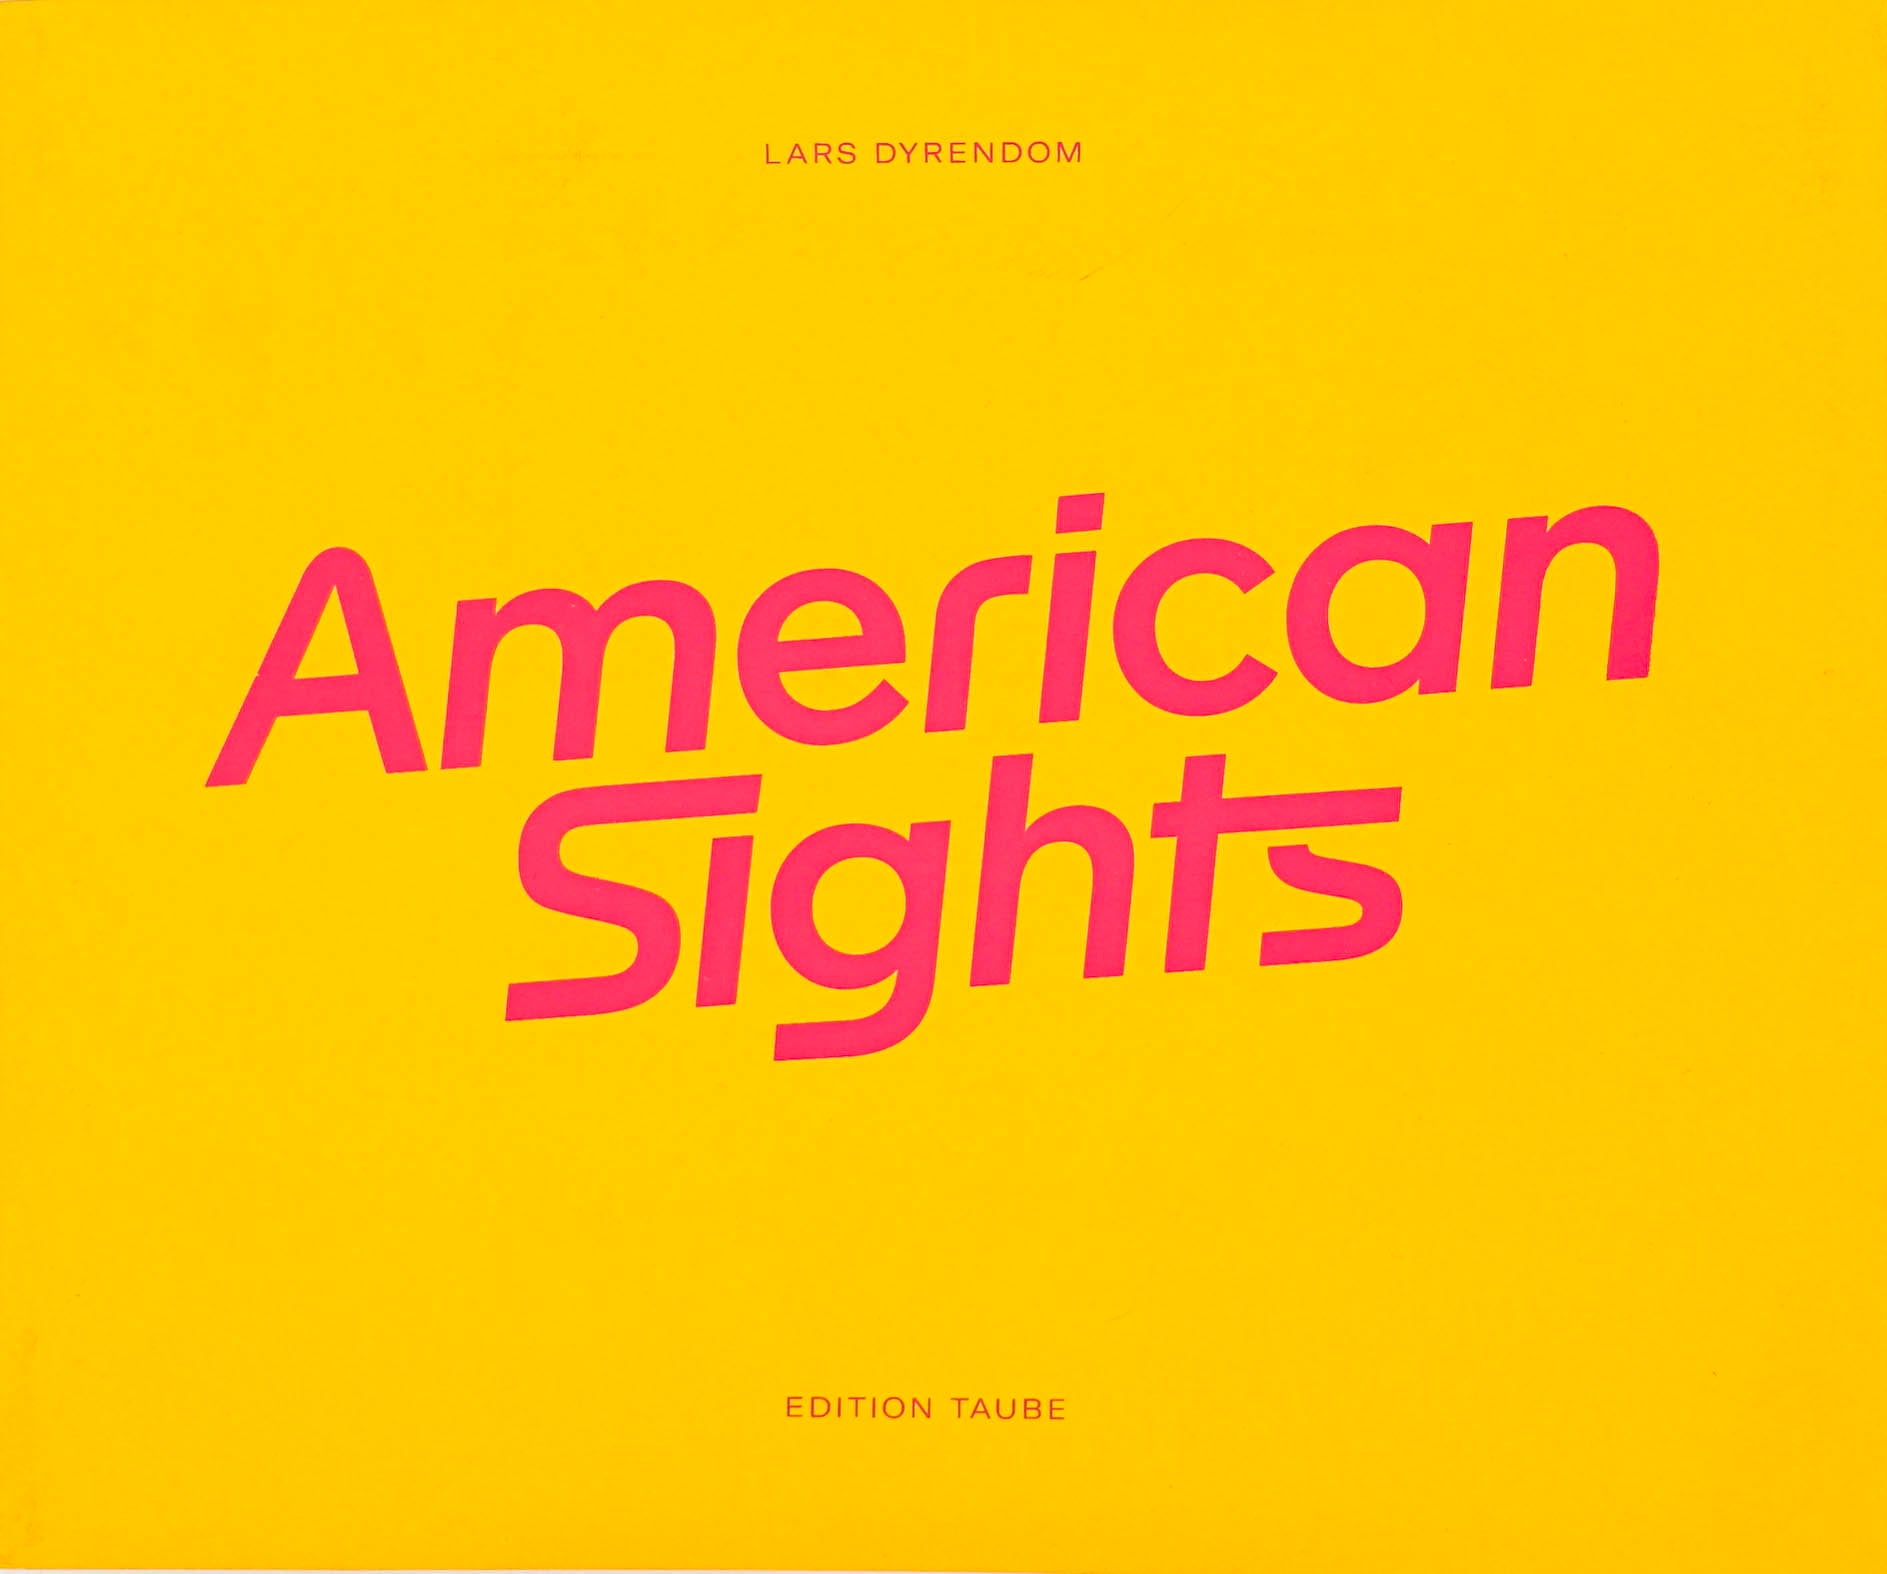 Lars Dyrendom American Sights Edition Taube in hot pink type with a mustard yellow backdrop 